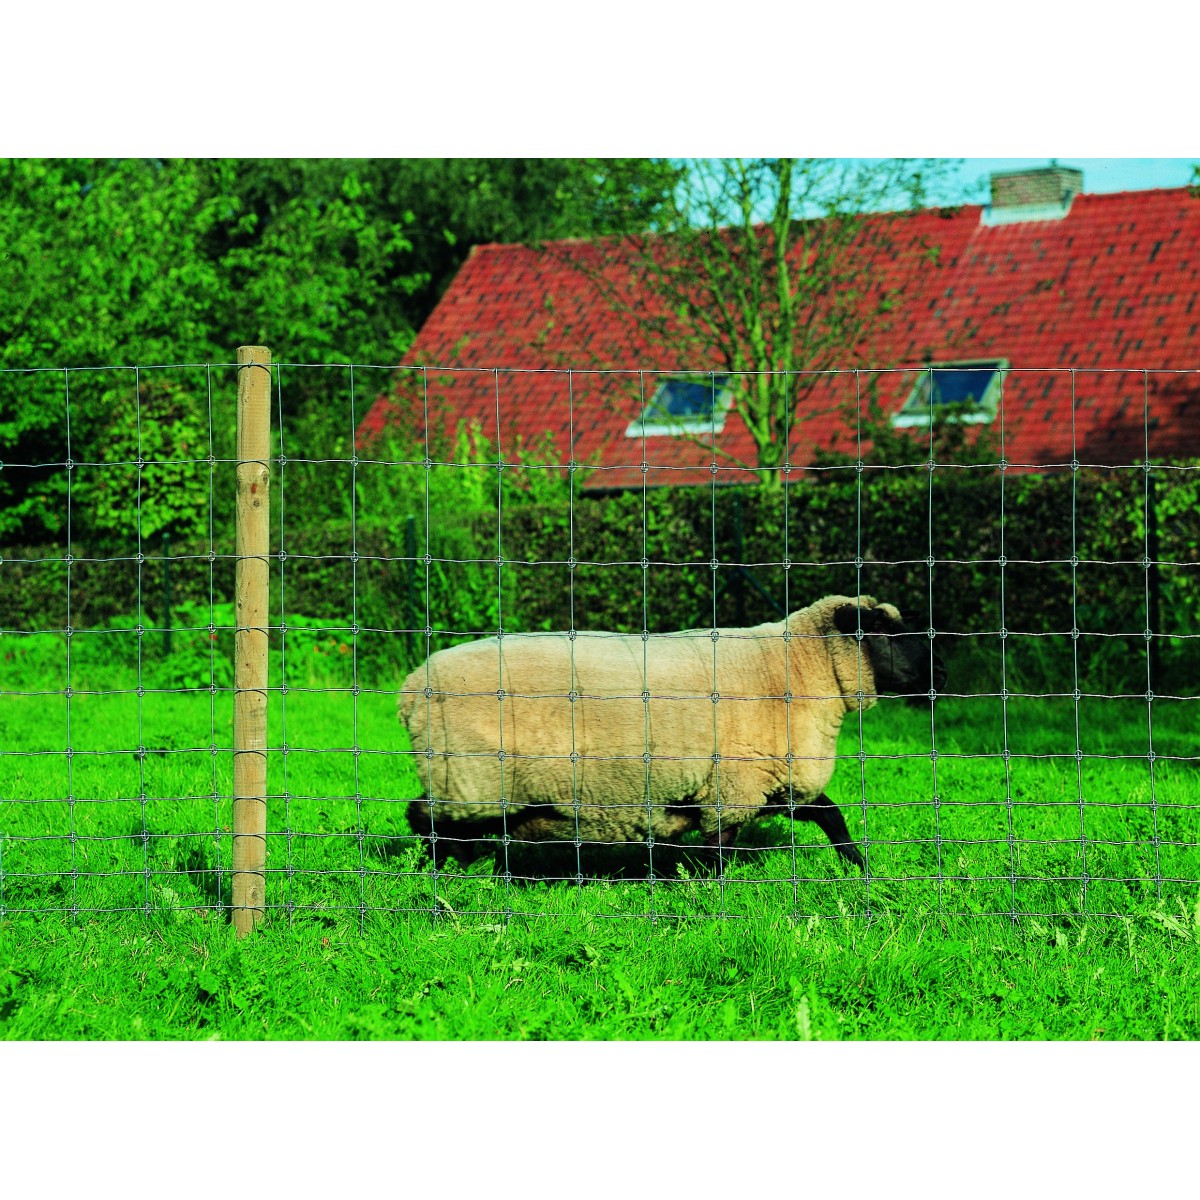 Grillage a mouton - Cdiscount